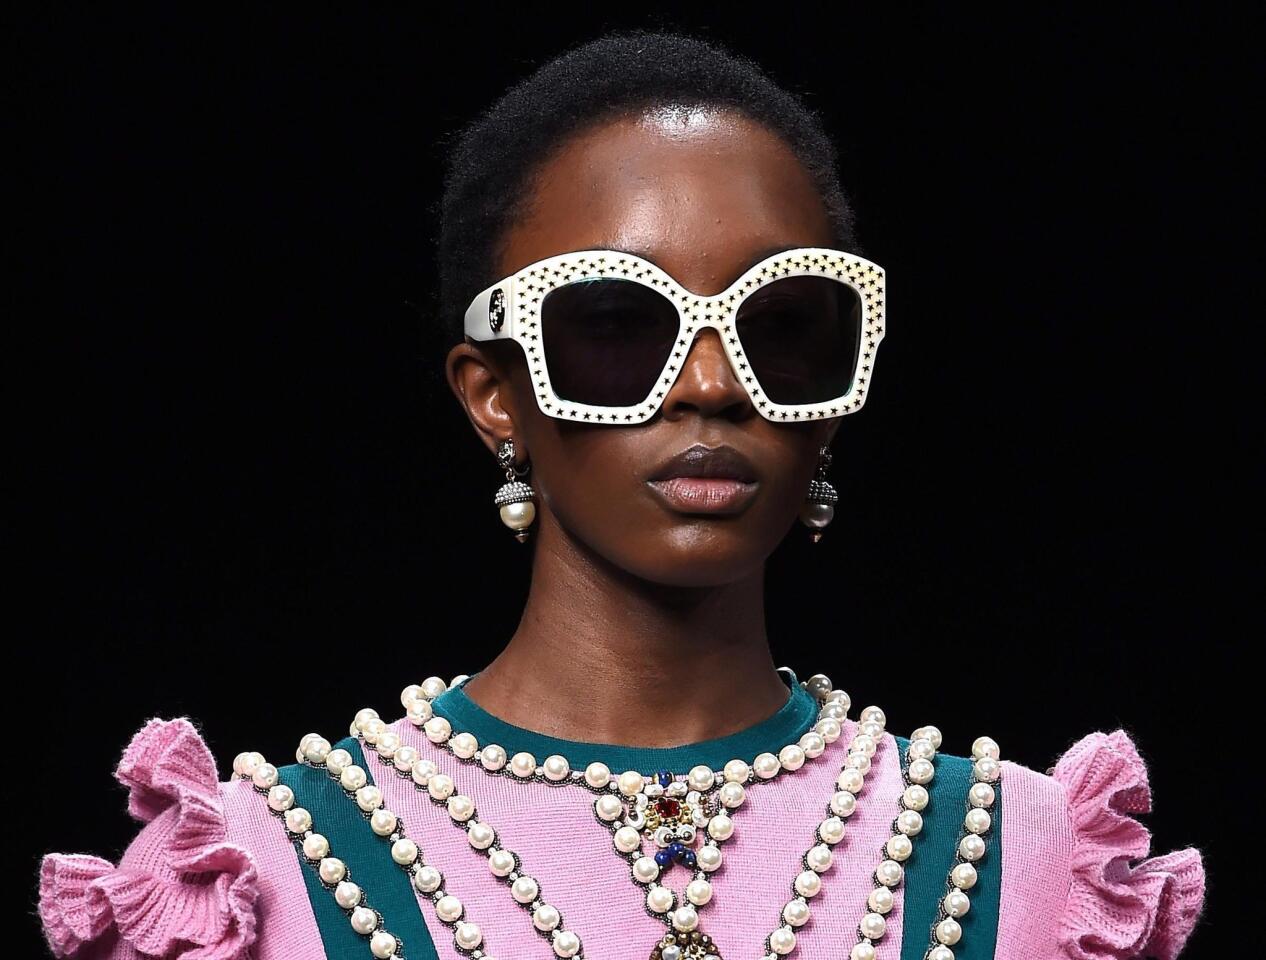 Big statement sunglasses, grandma-chic pearls and pops of color mark the fall/winter looks from Gucci.